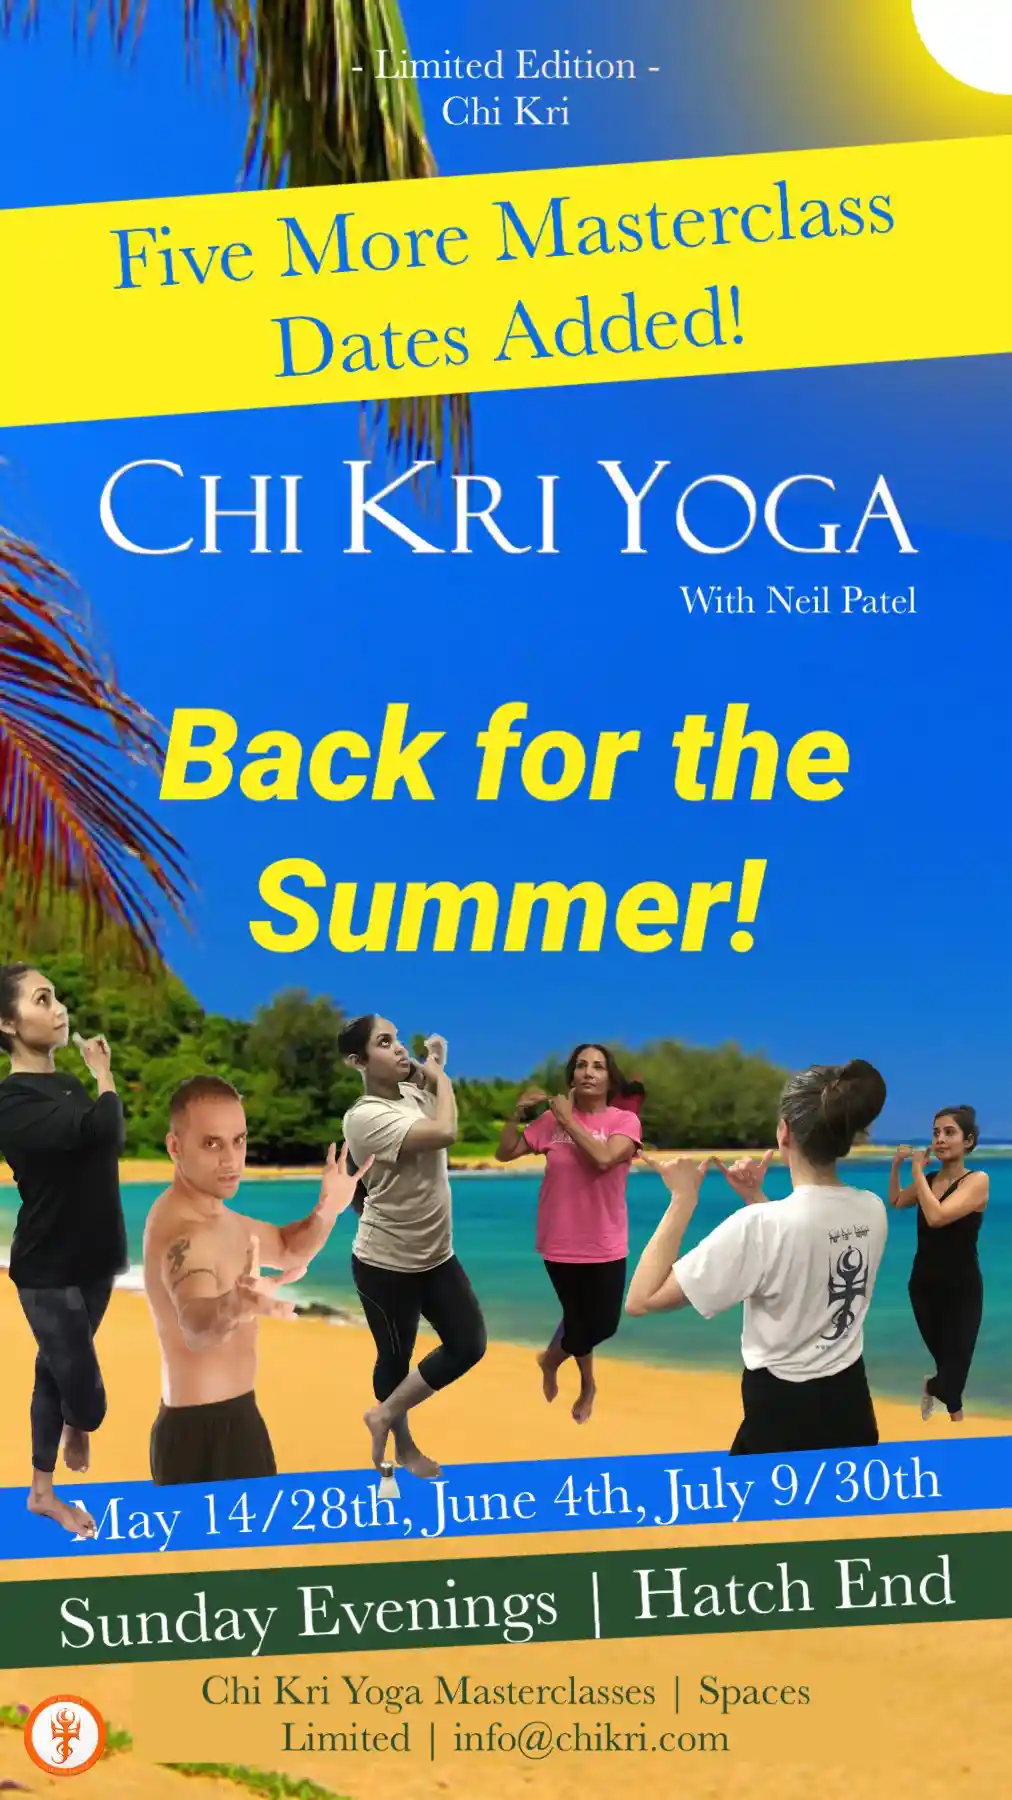 The Chi Kri Yoga Masterclass - Back for the Summer